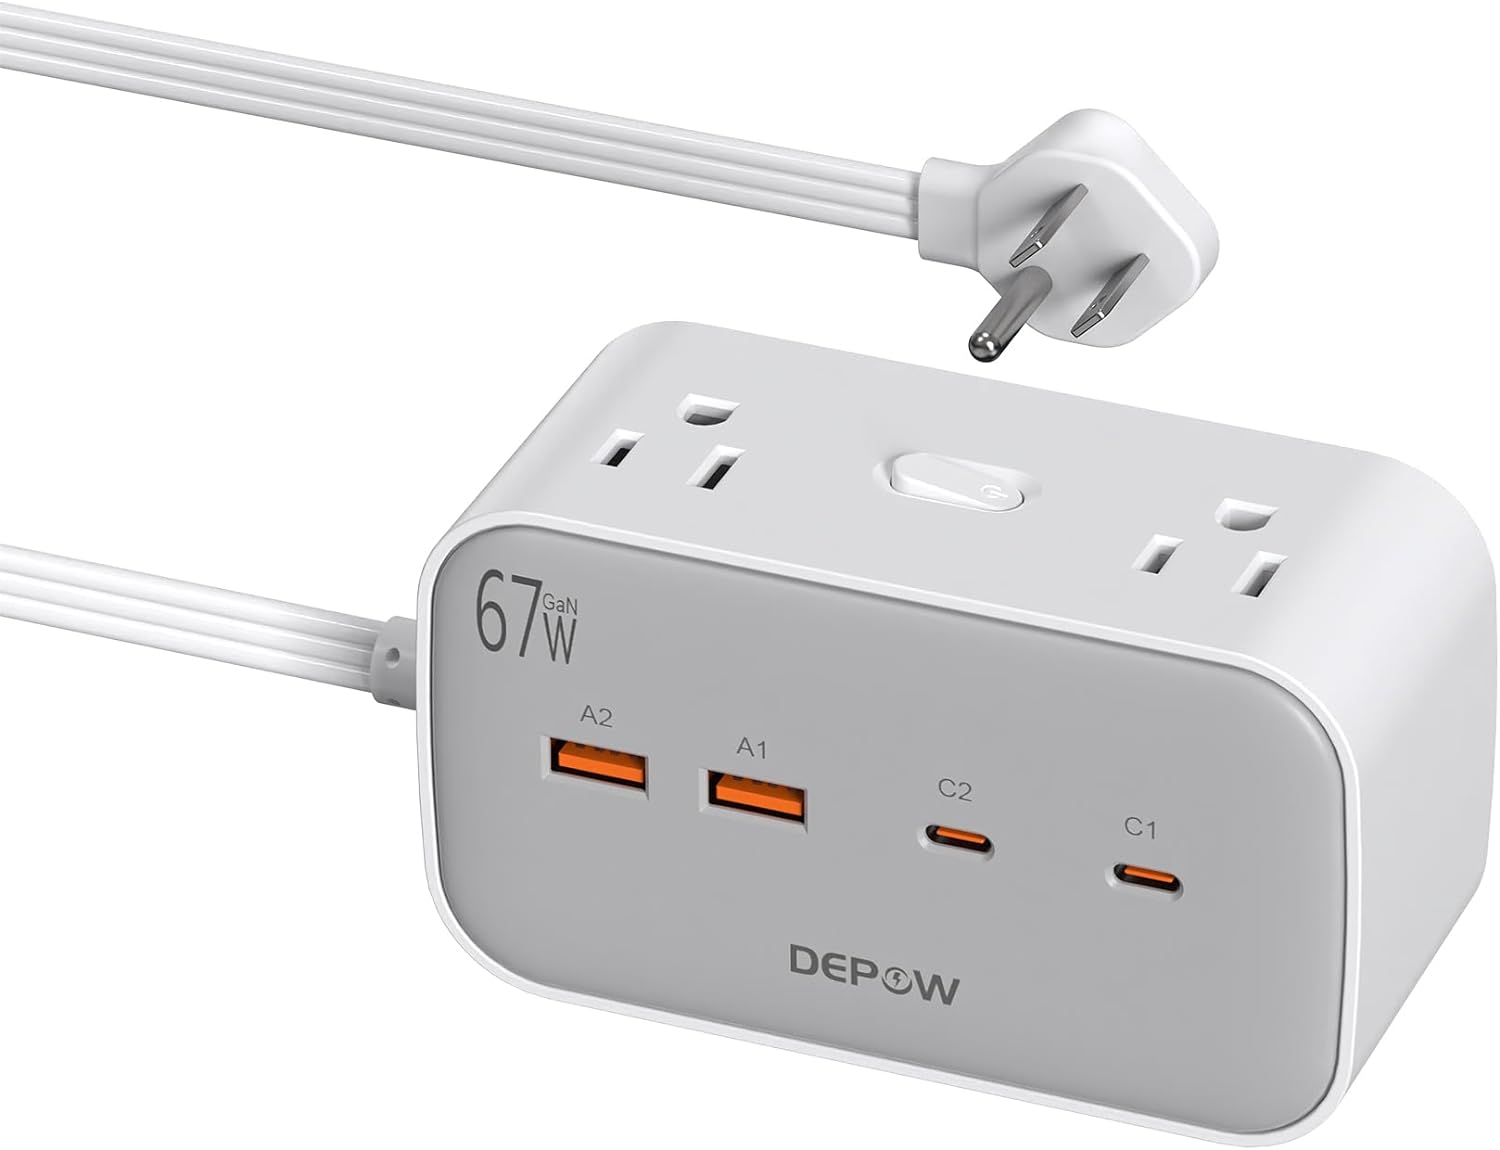 USB C Power Strip 67W, Surge Protector(1700 Joules) with 8 Outlets (1875W/15A) & 4 USB Ports, 6Ft Ultra Thin Flat Extension Cord, GaN Charging Station, Compatible with MacBook Pro, iPhone14 Pro